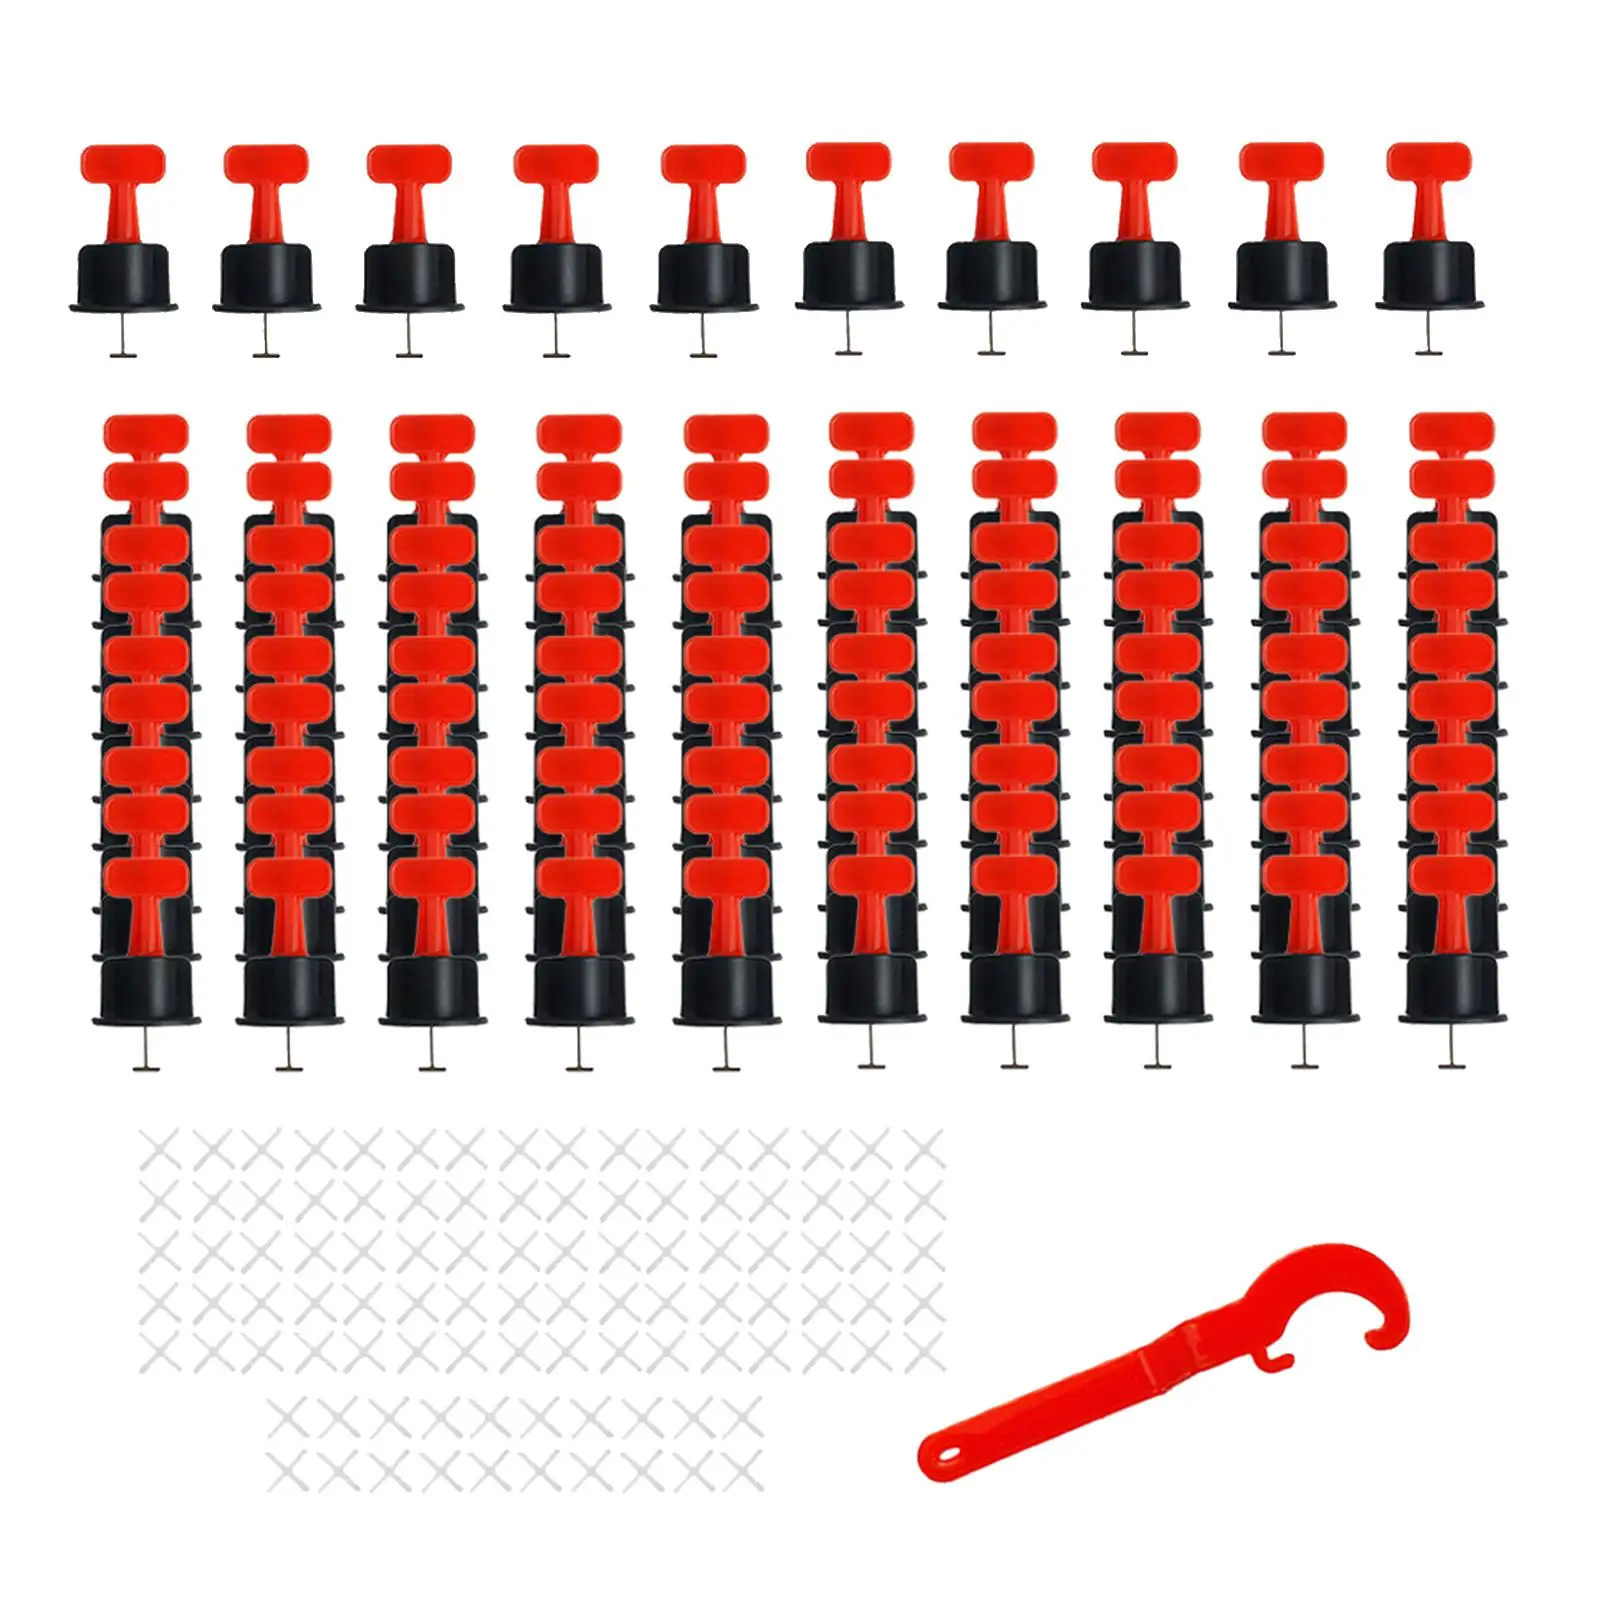 151Pcs Reusable Tile Leveling System Kit with Wrenches 2.0 mm Tile Spacer Tile Leveler Spacers for Wall Building Floor